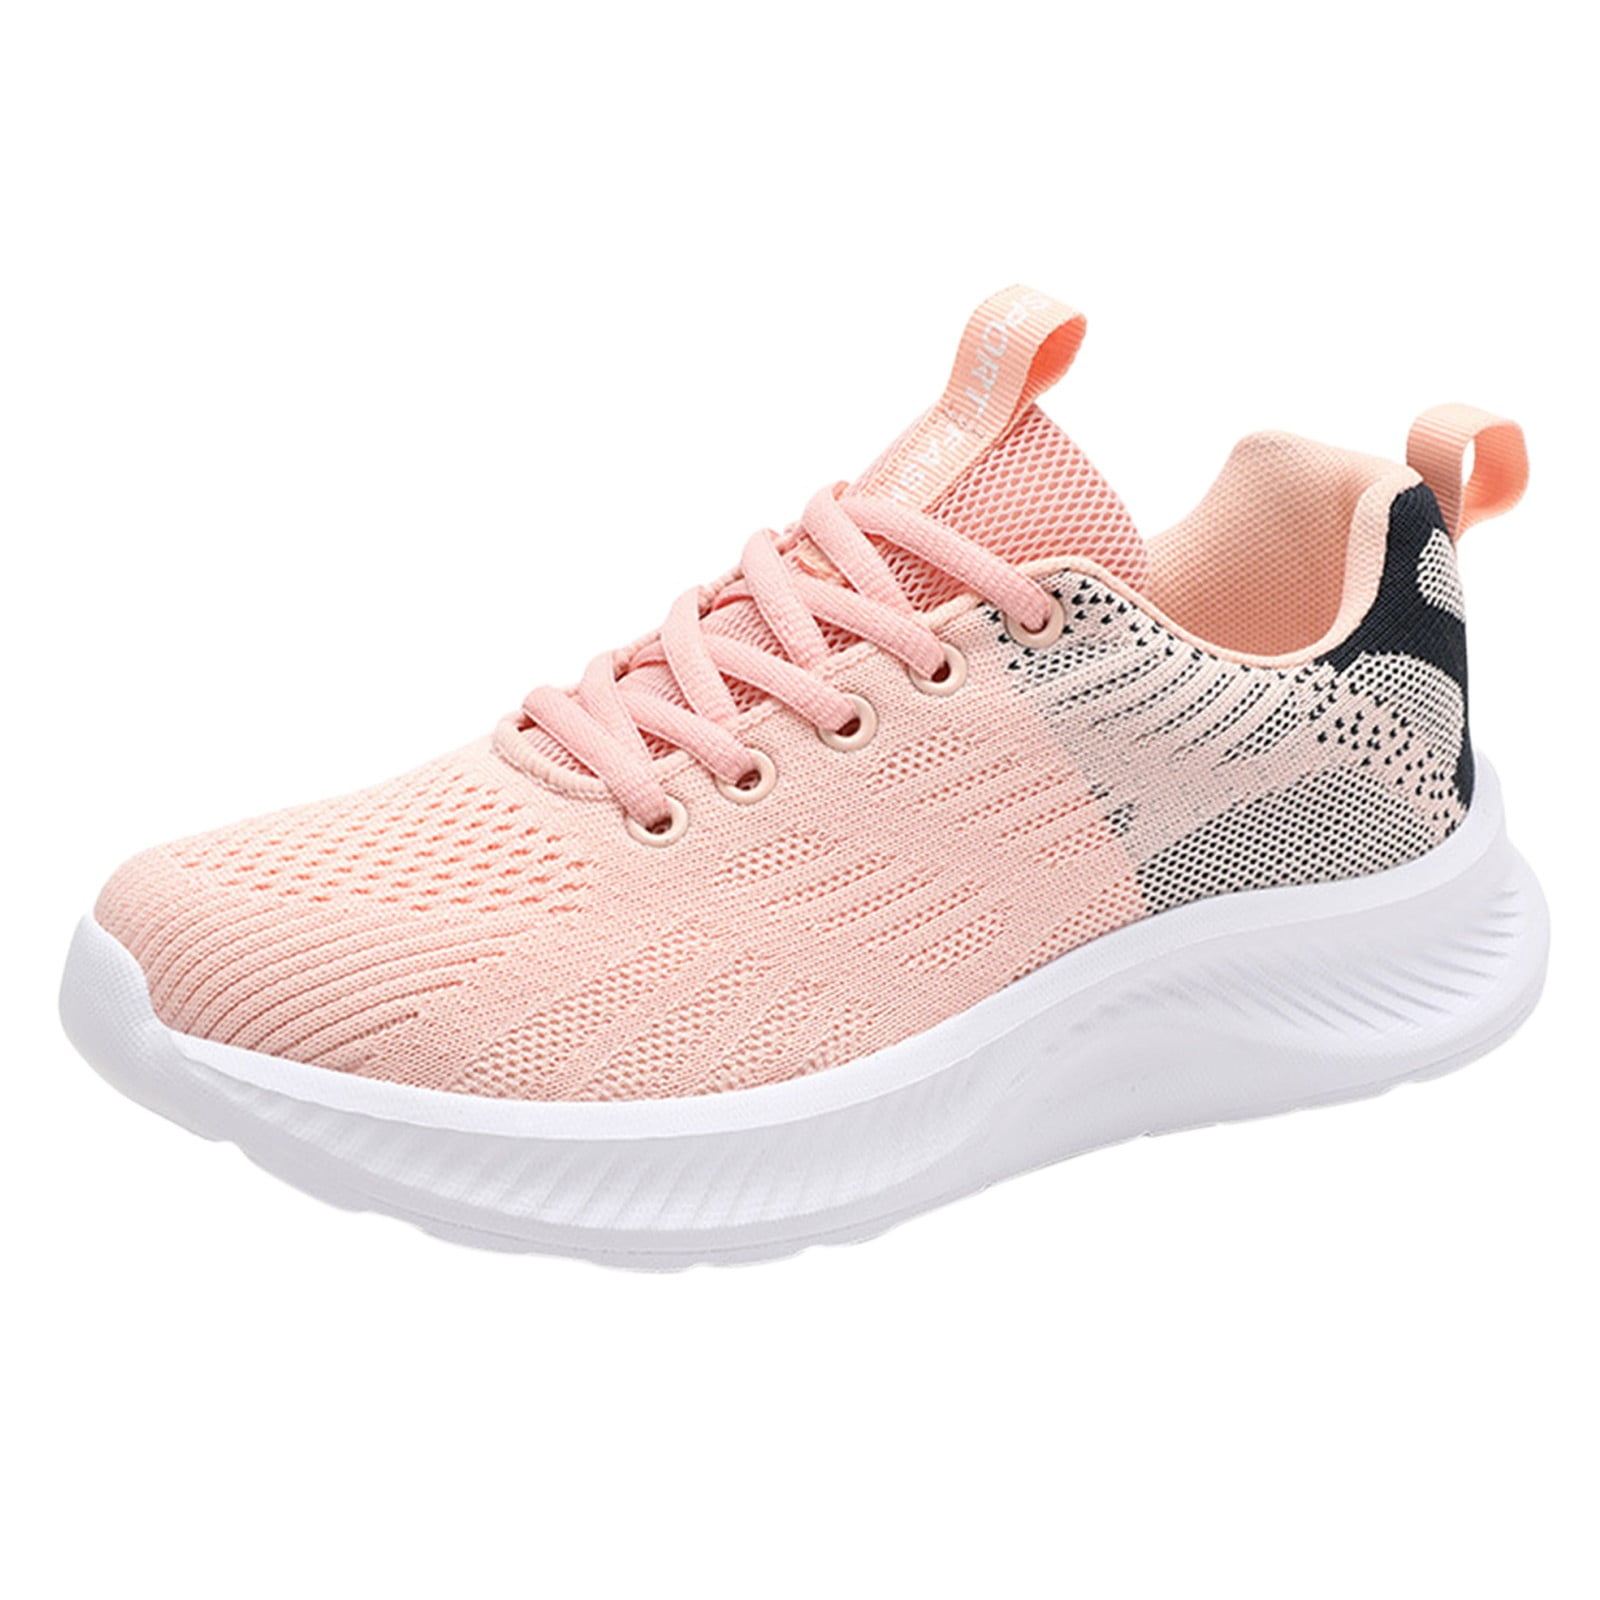 KaLI_store Womens Casual Shoes Sneakers Breathable Women Walking Shoes Slip  on Trainers Women's Comfortable Casual Ladies Shoes Pink,6.5